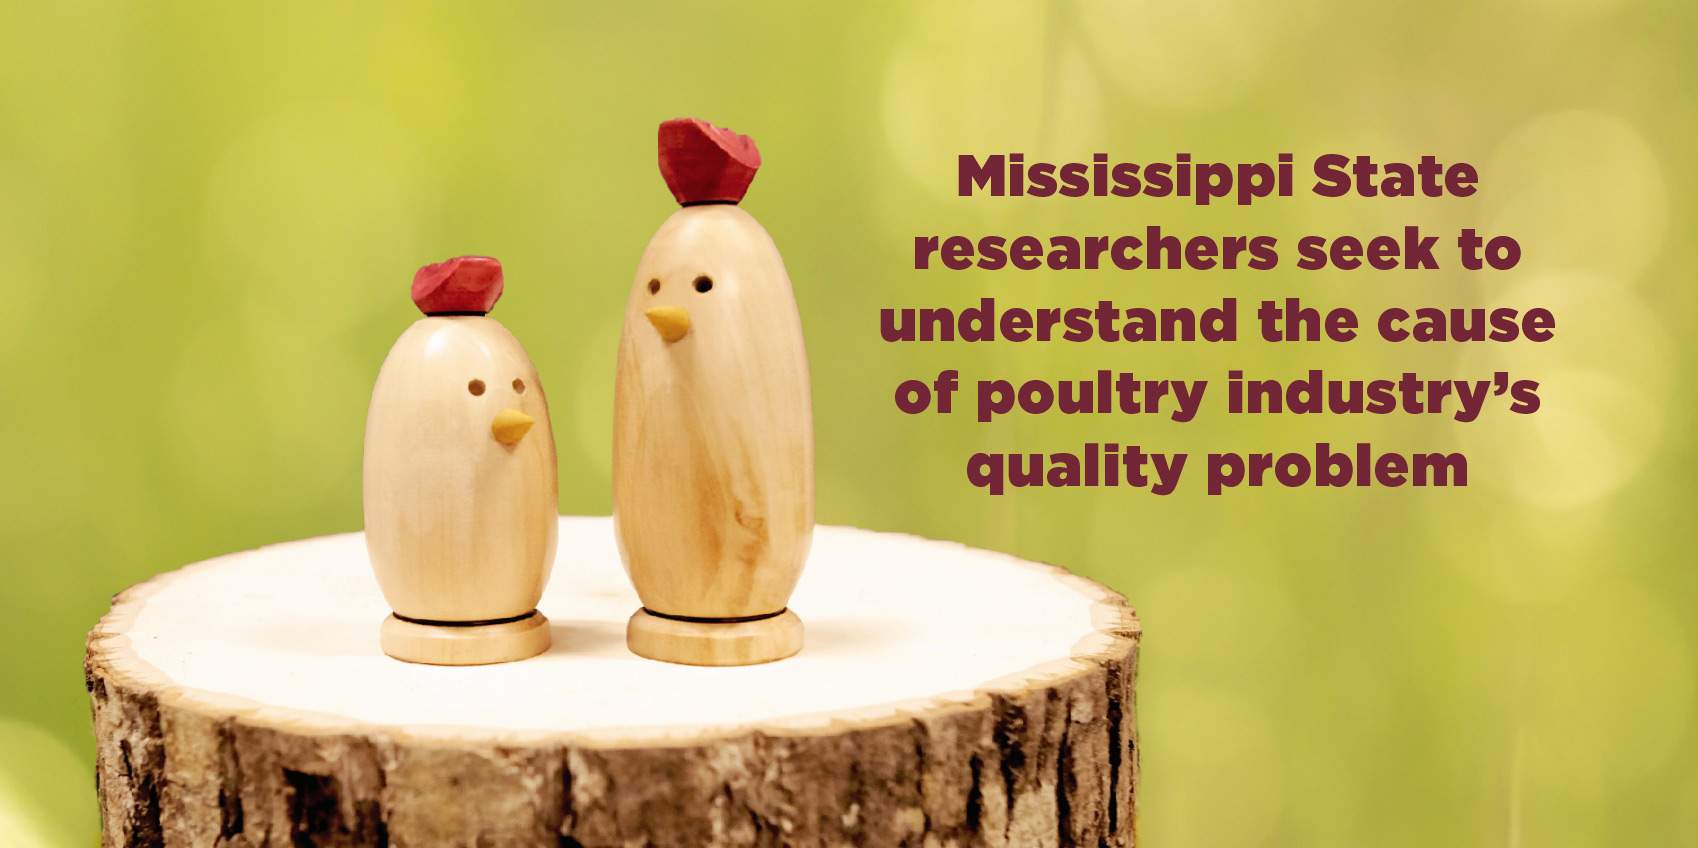 Mississippi state researchers seek to understand the industry's cause of quality's problem.